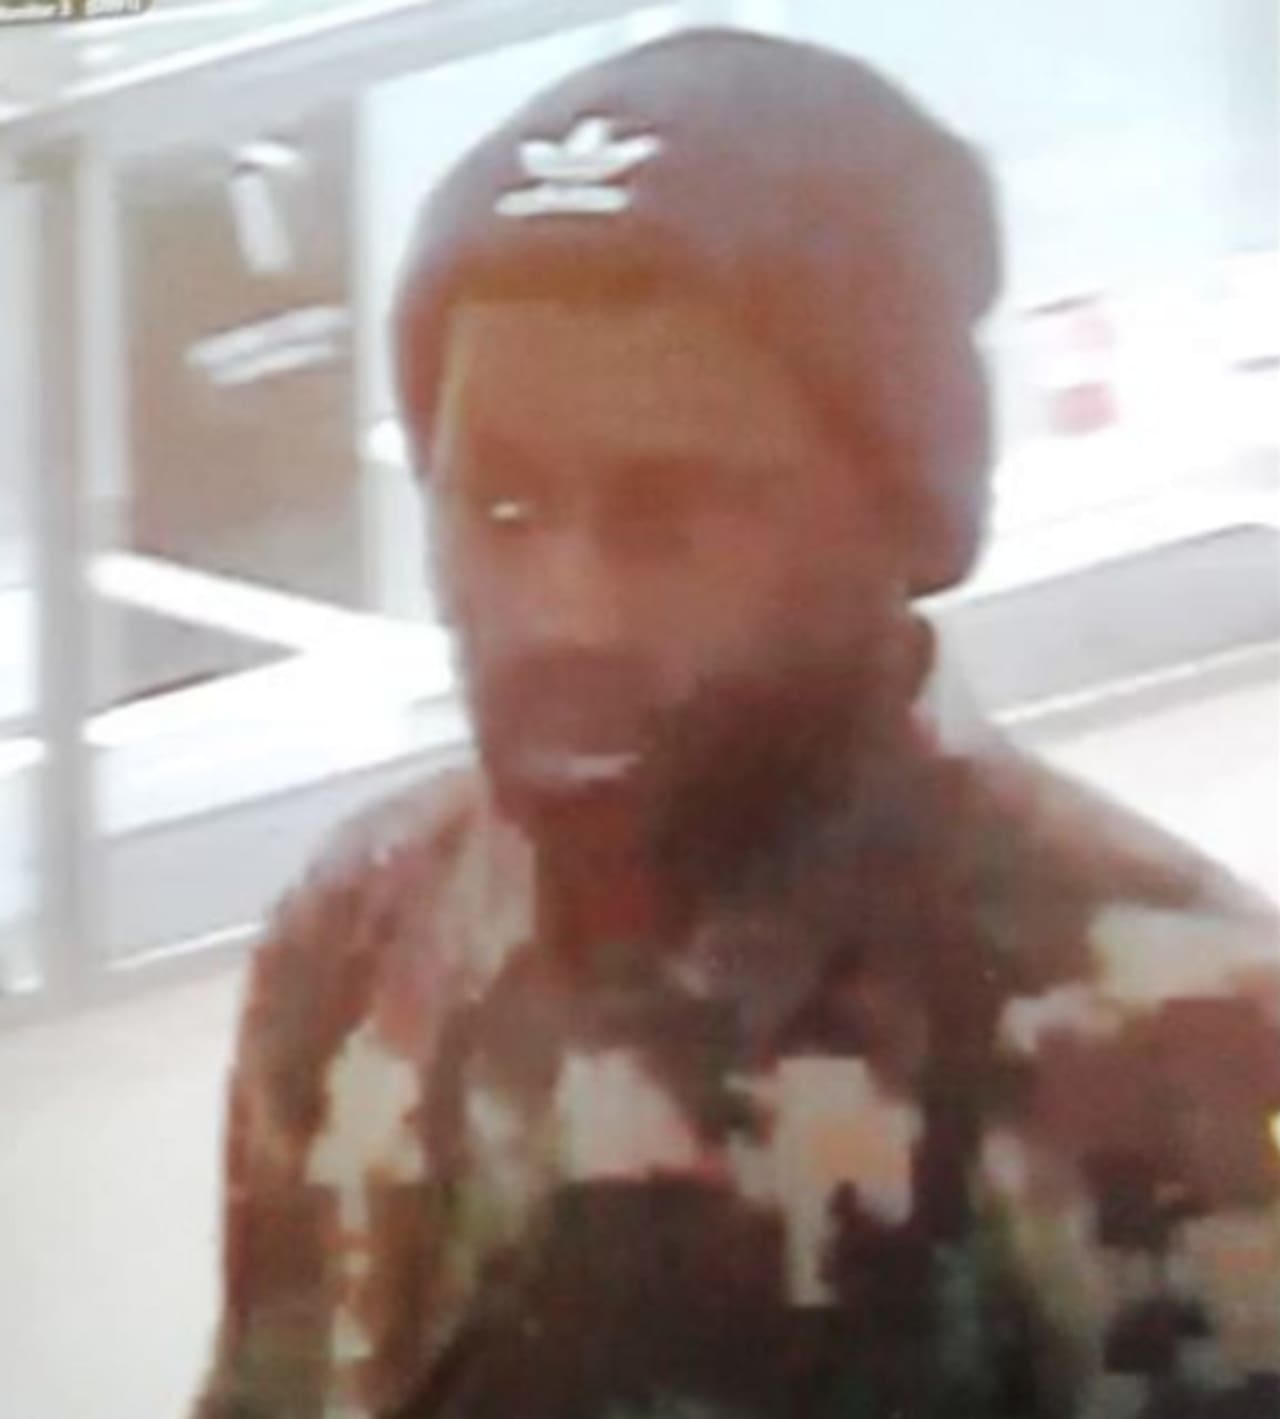 Police are on the lookout for a man accused of stealing men’s clothing valued at $120 from Kohl’s in Commack (45 Crooked Hill Road) on Thursday, Feb. 21.